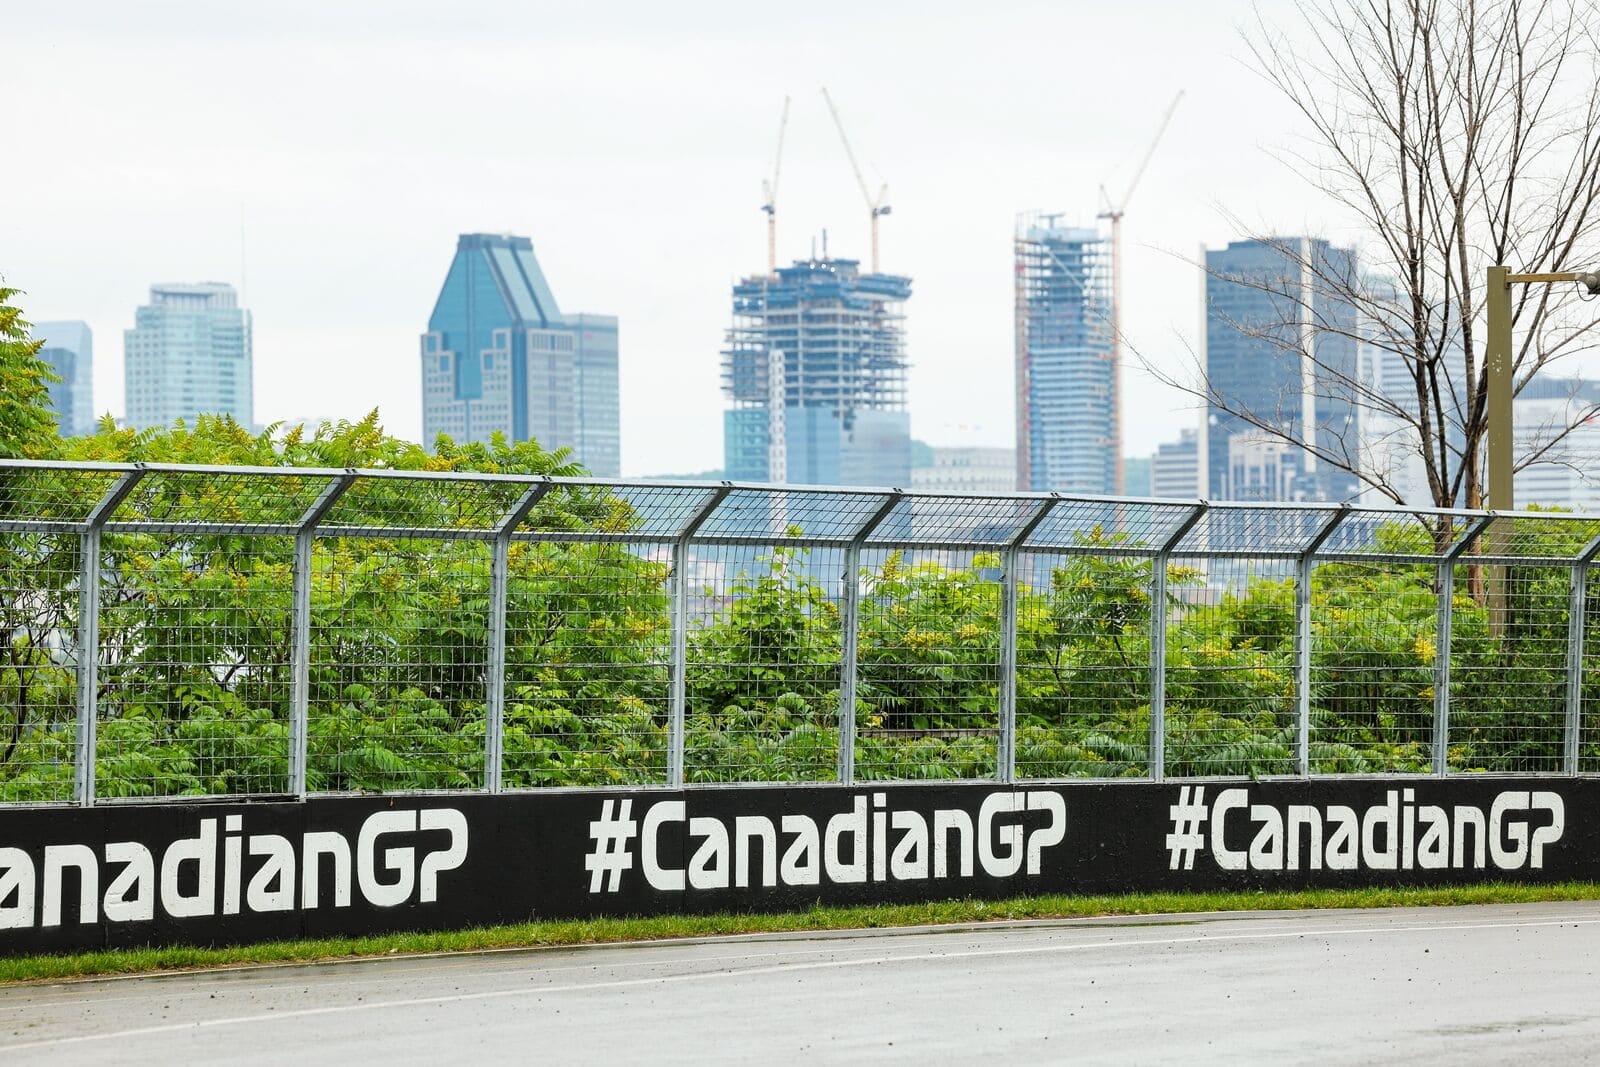 Is the Canadian Grand Prix always in Montreal